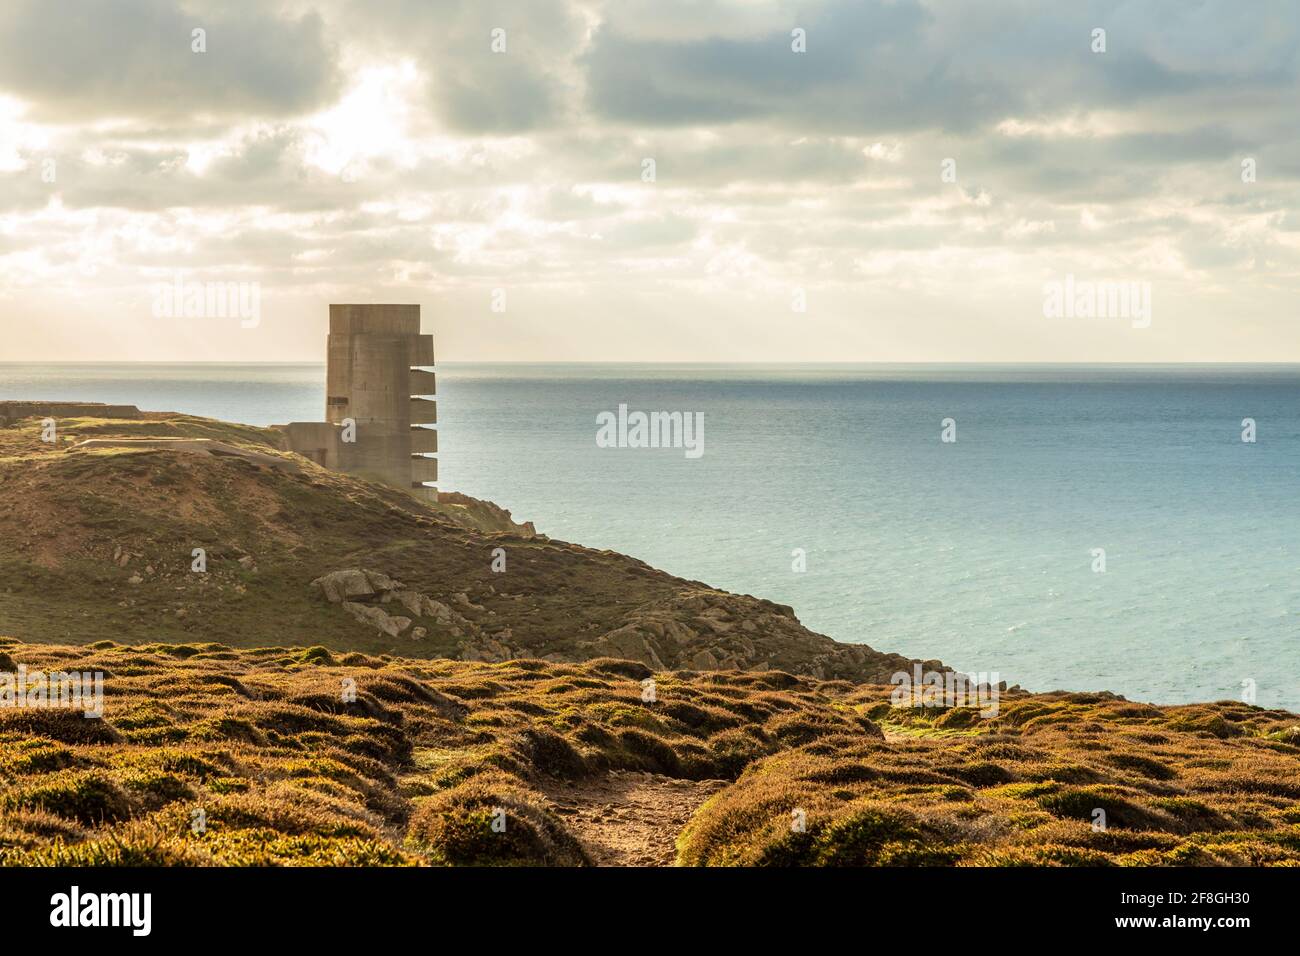 WWII concrete nazi naval tower on the seashore, Saint Quen, bailiwick of Jersey, Channel Islands Stock Photo